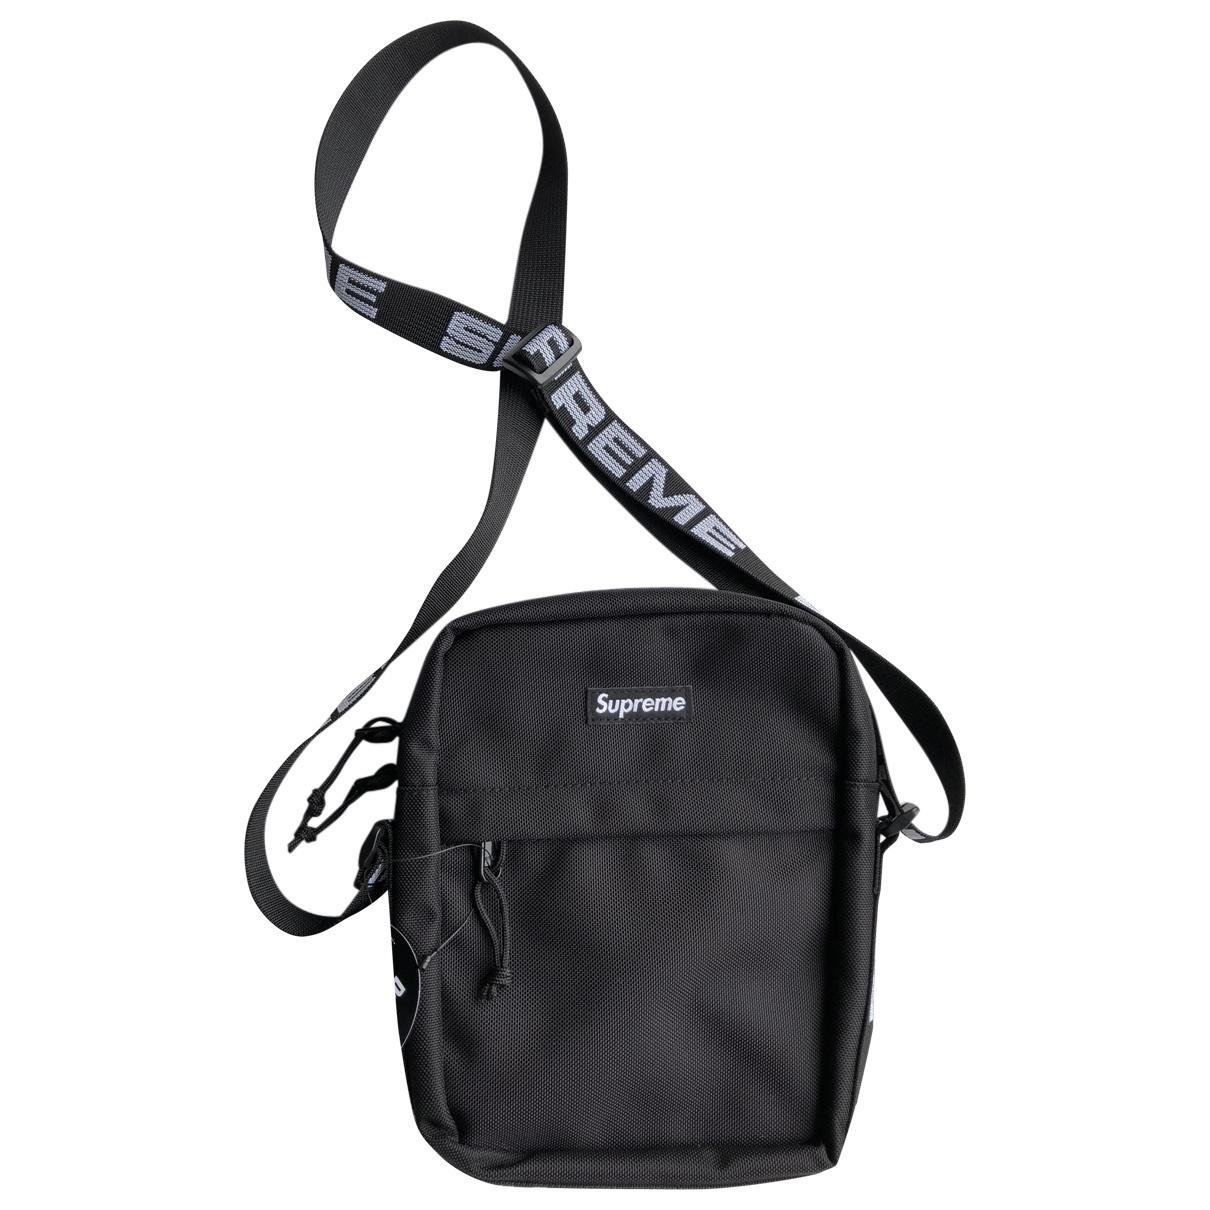 Supreme Synthetic Small Bag in Black for Men - Lyst